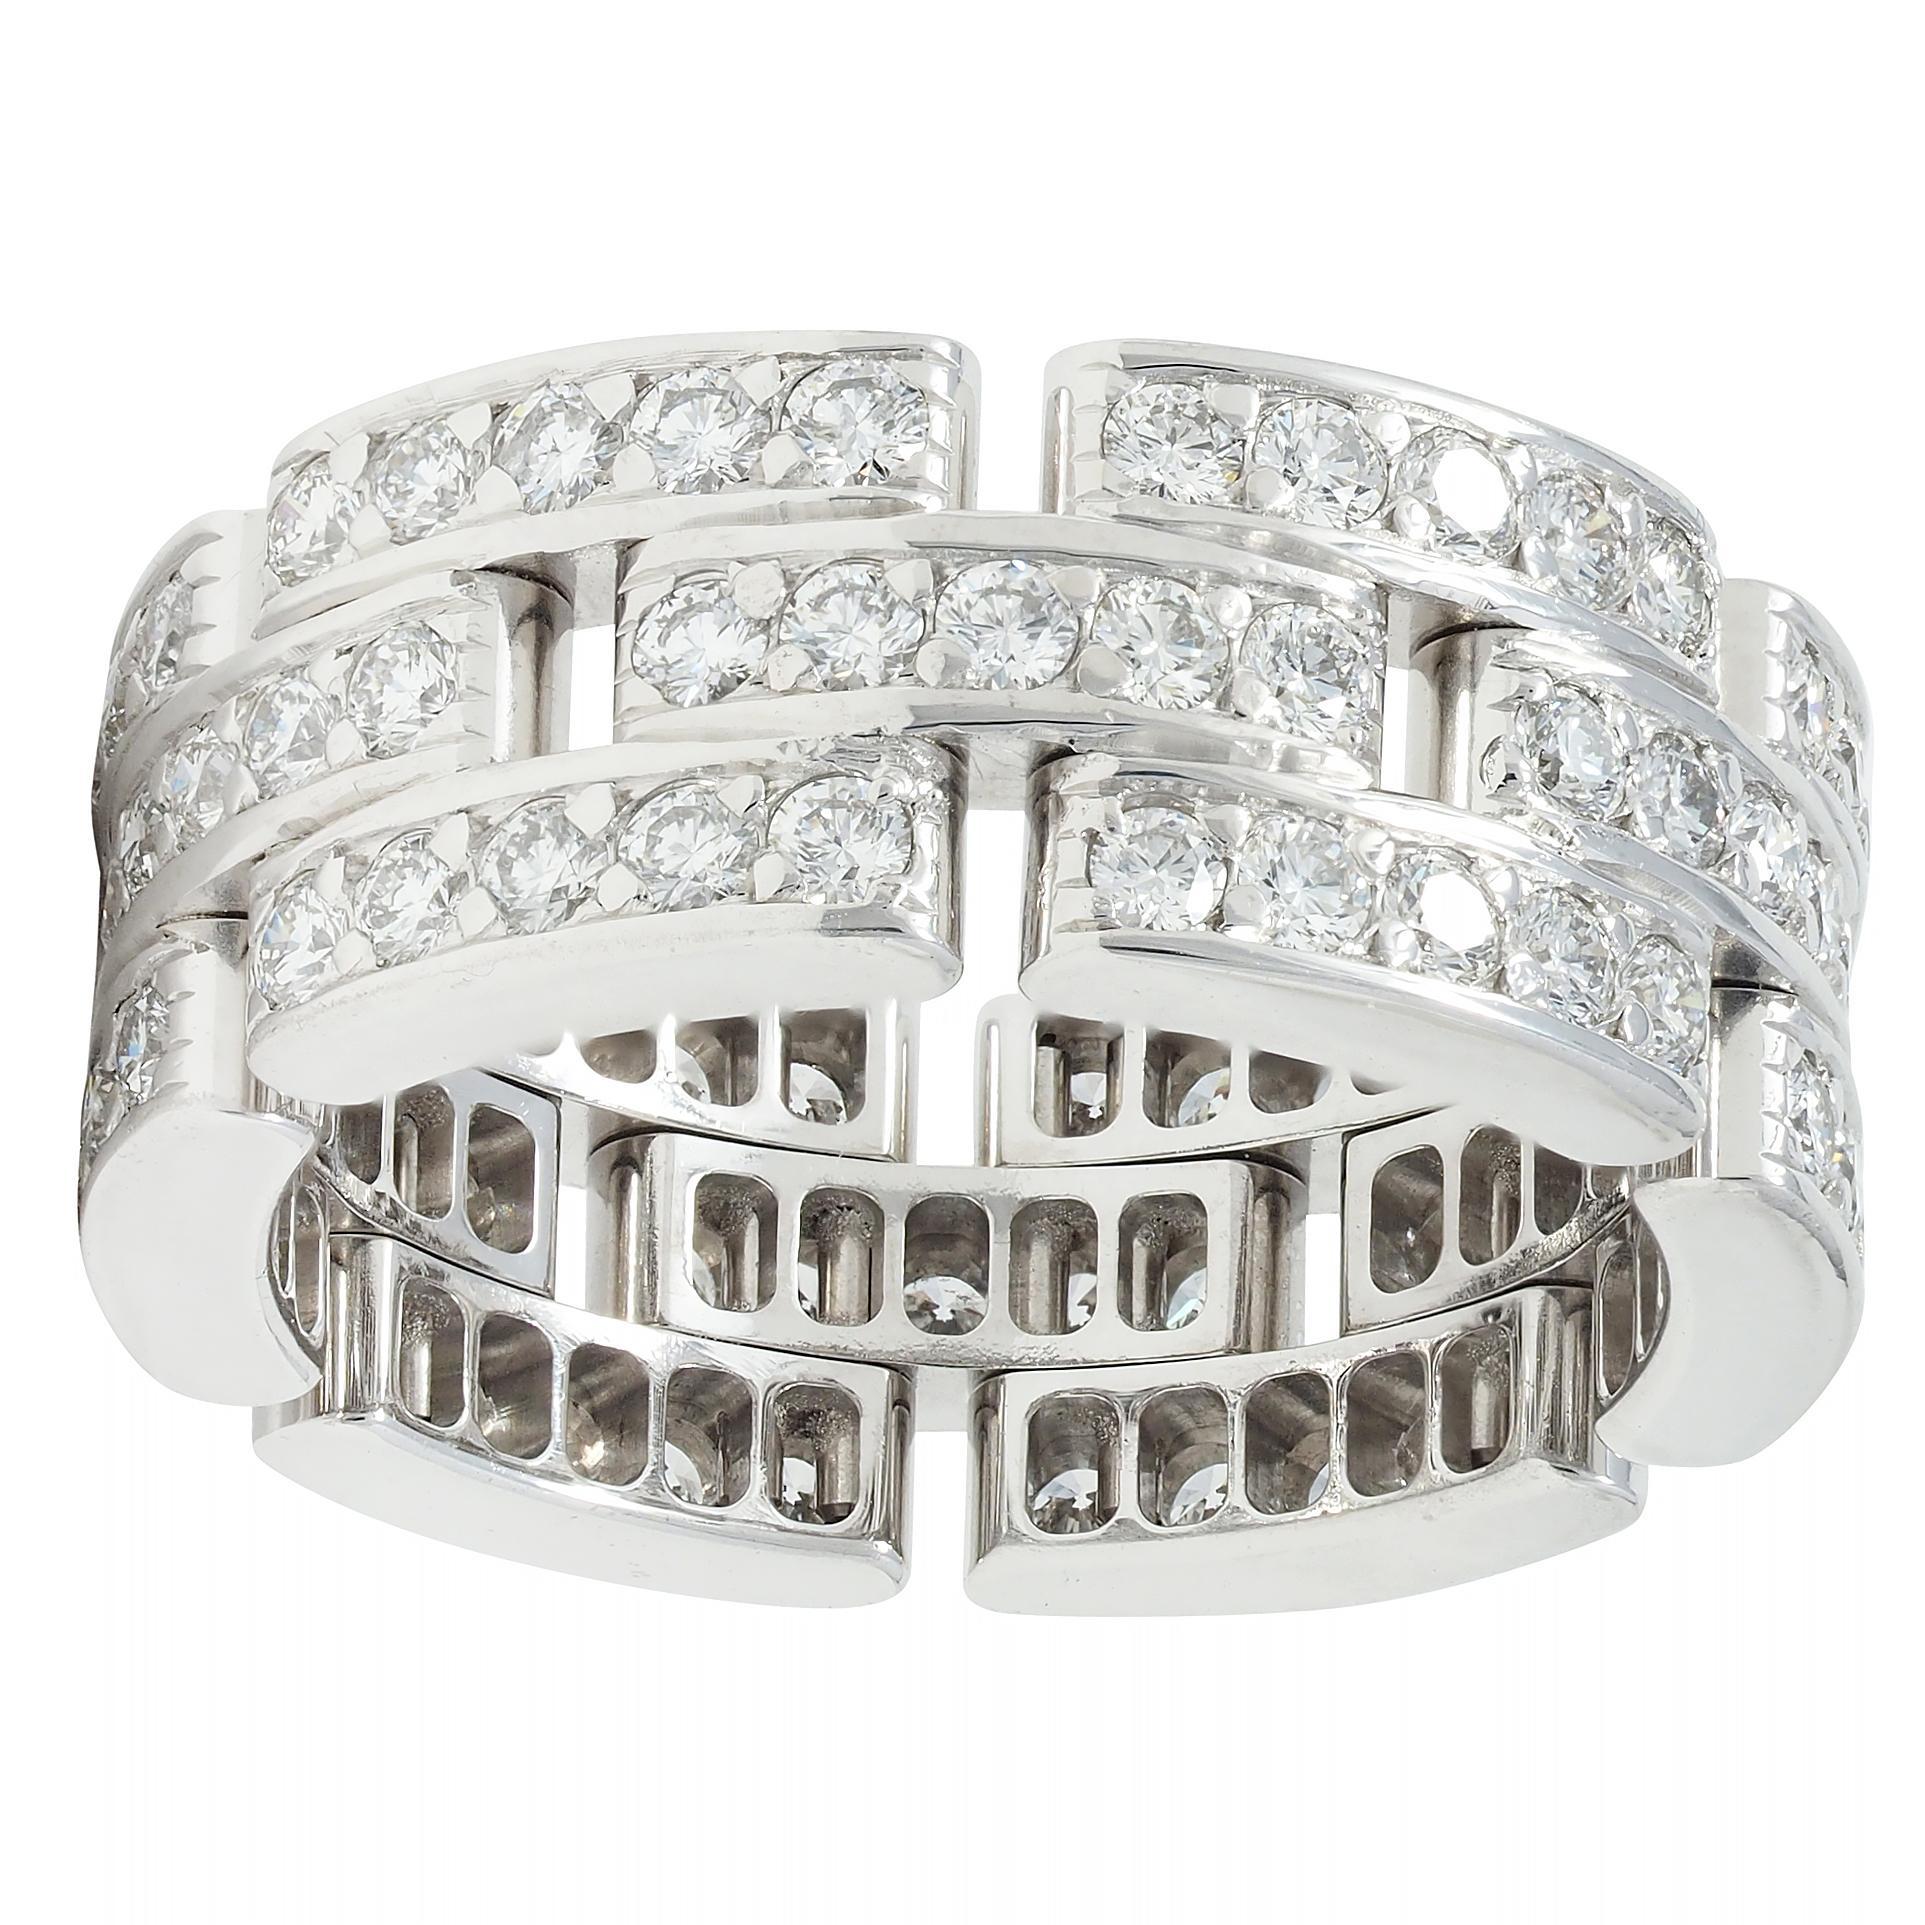 Designed as a wide band pierced with a panther link motif
Bead set throughout with round brilliant cut diamonds
Weighing approximately 1.40 carats total 
F/G color with VS1 clarity
Completed by high polish edges
Stamped for 18 karat gold
Numbered